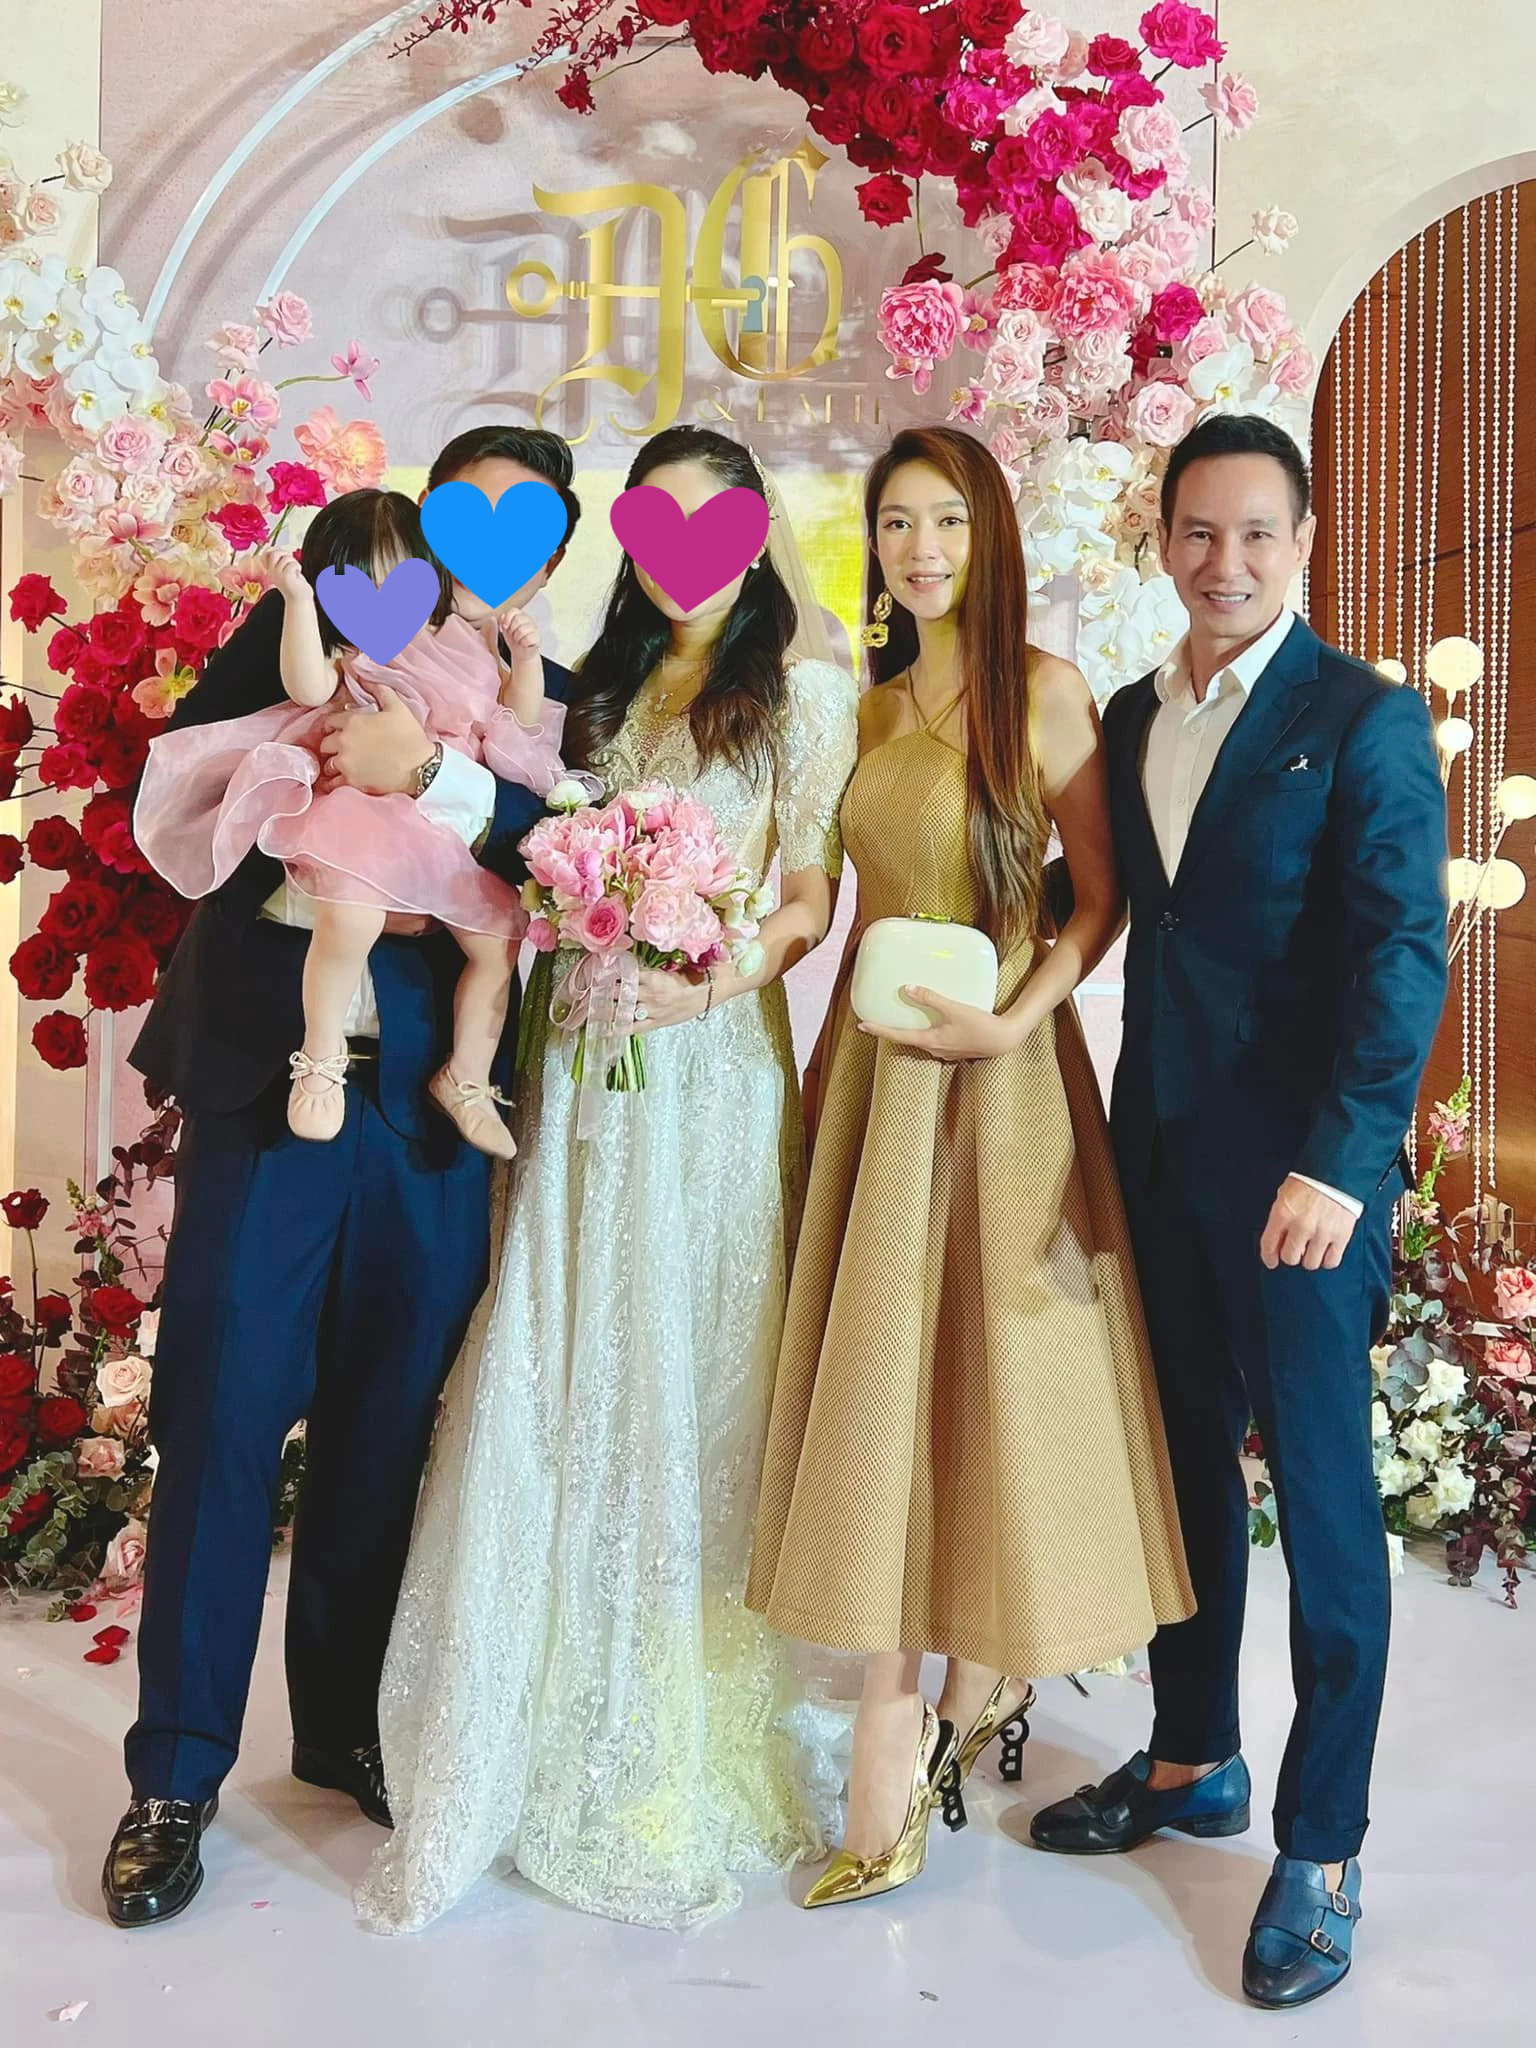 The wedding has a star-studded guest lineup Vbiz: Ly Hai couple - Minh Ha is in love, Thanh Van Hugo shows off her pregnant figure - Photo 3.